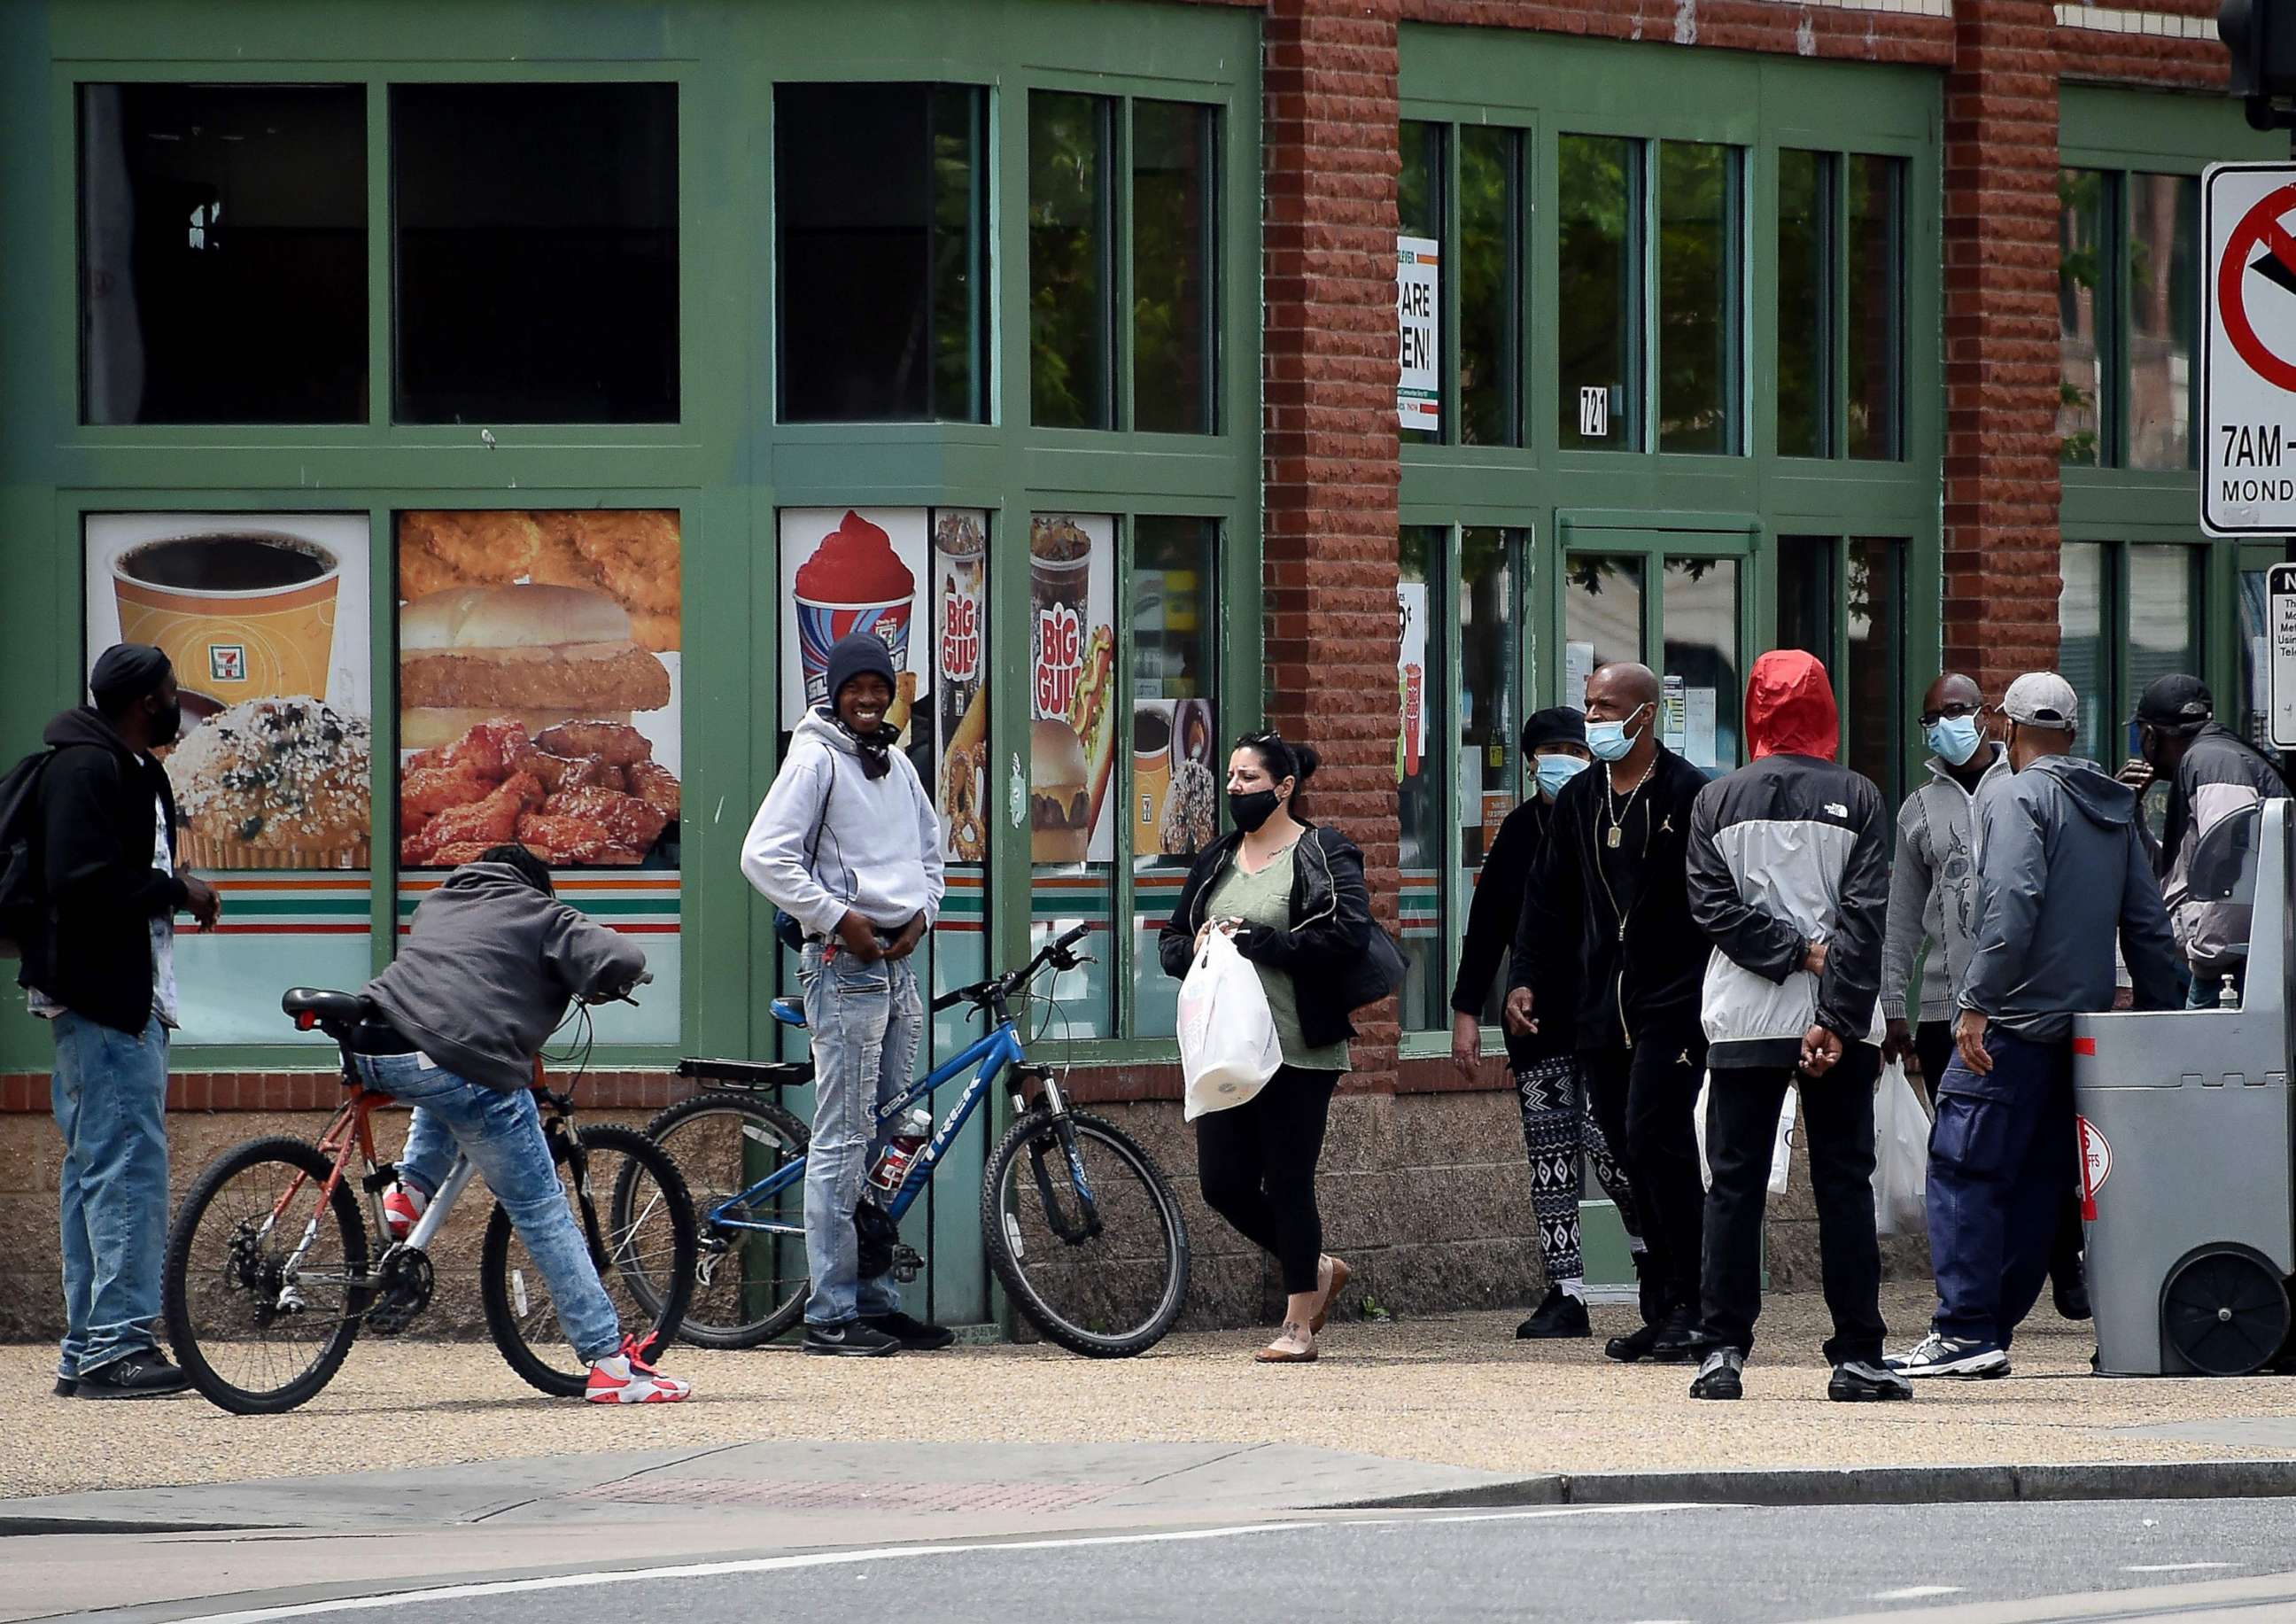 PHOTO: People in the Southeast neighborhoods of Washington stand in the street without respecting social distances, amid the coronavirus pandemic, May 19, 2020.